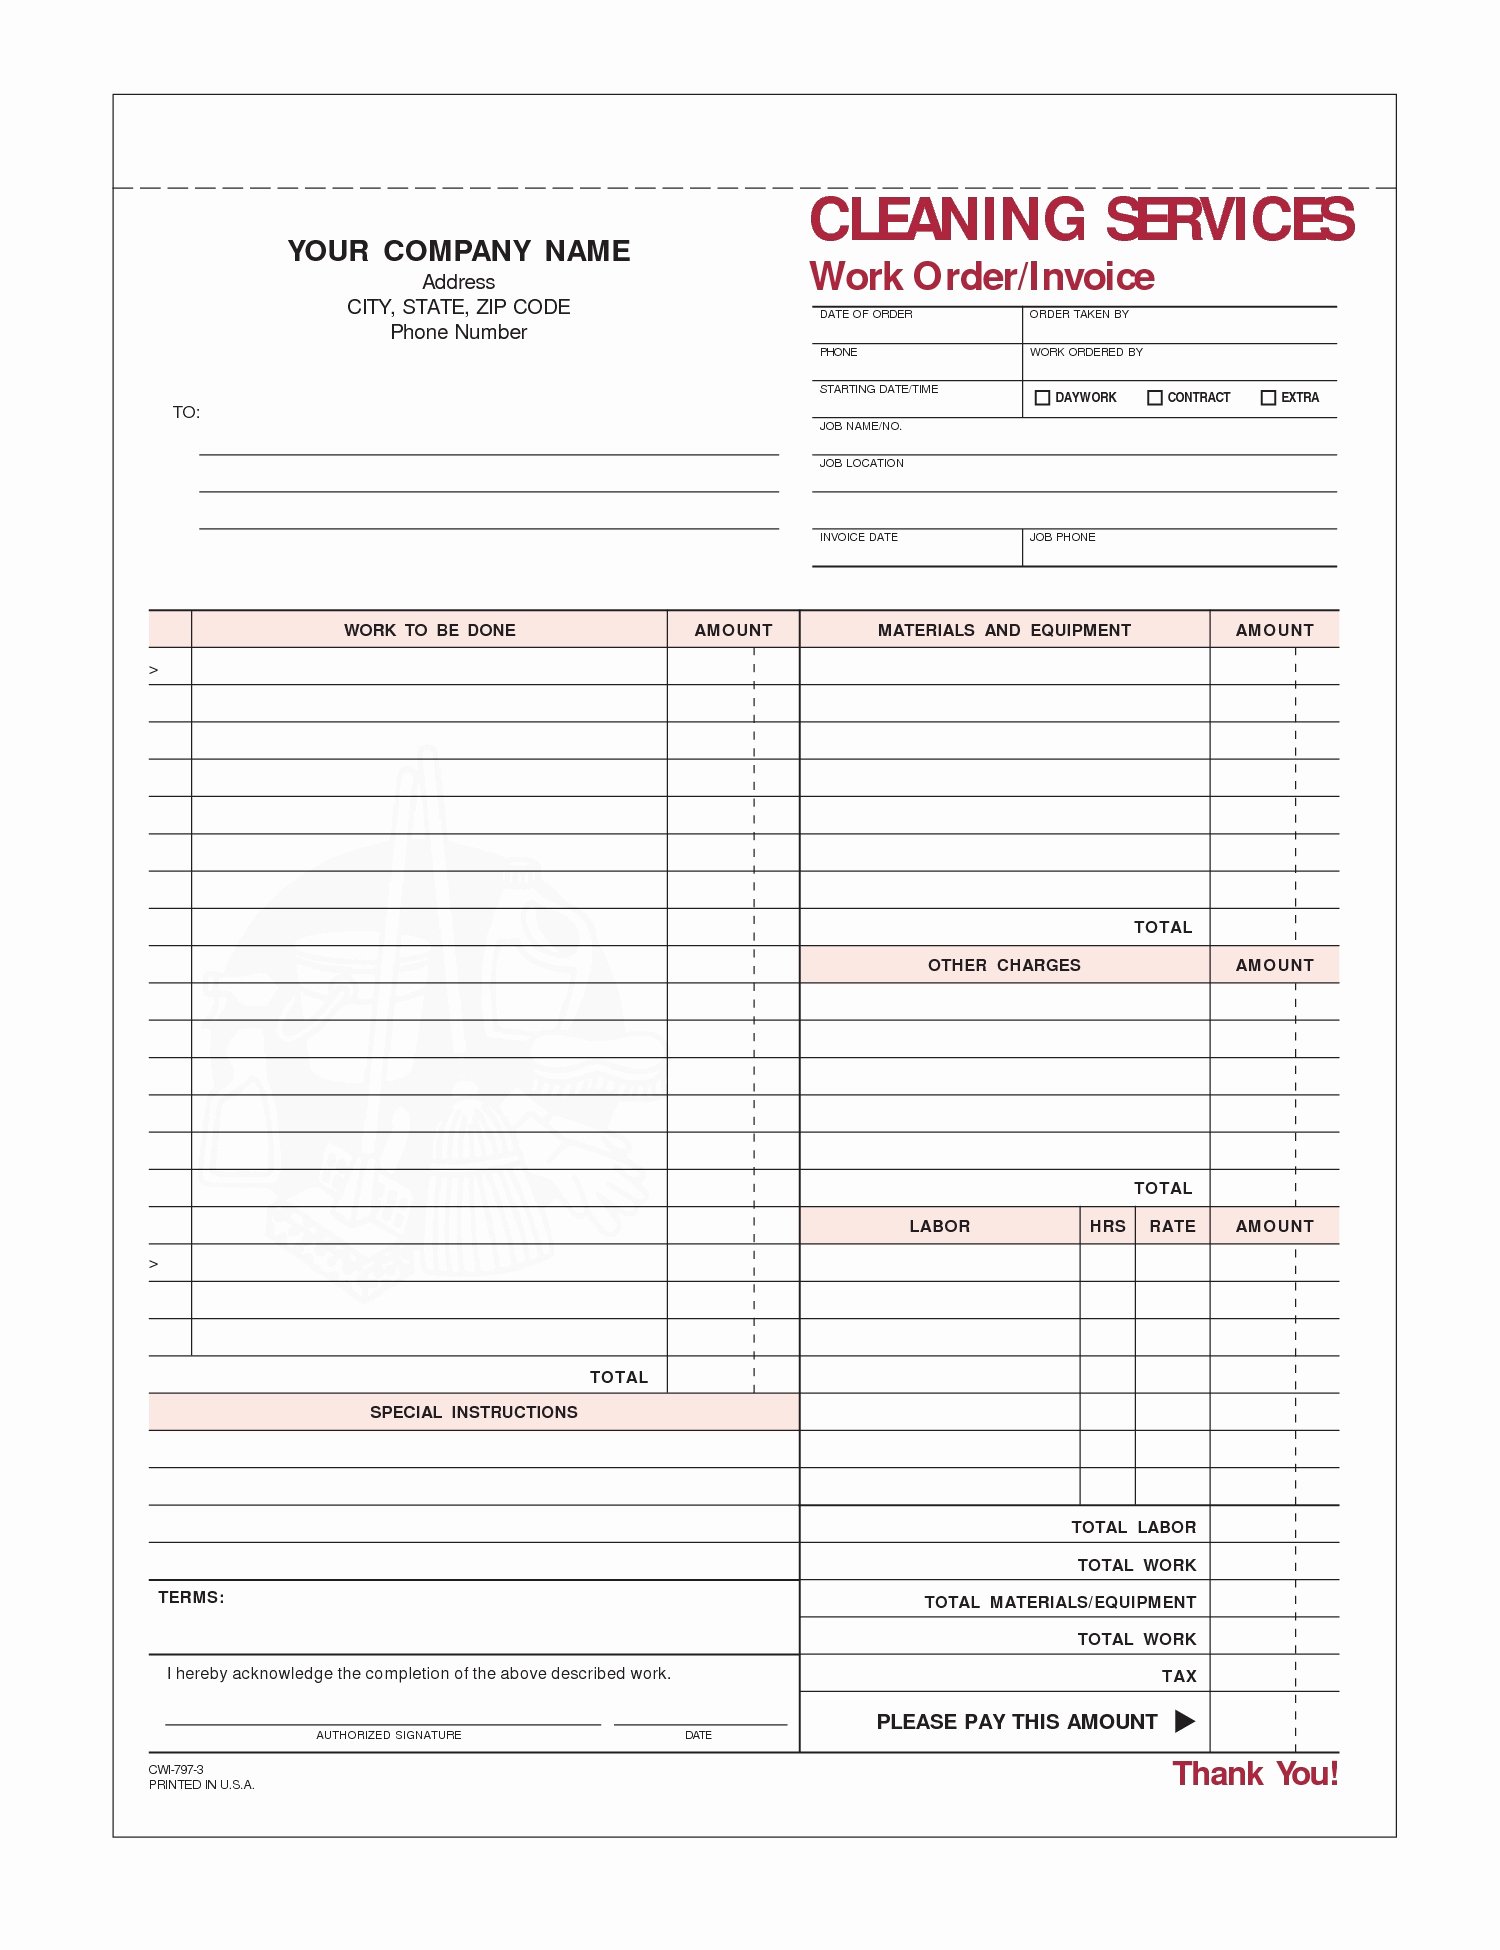 Cleaning Services Invoice Template New Sample Cleaning Invoice Invoice Template Ideas